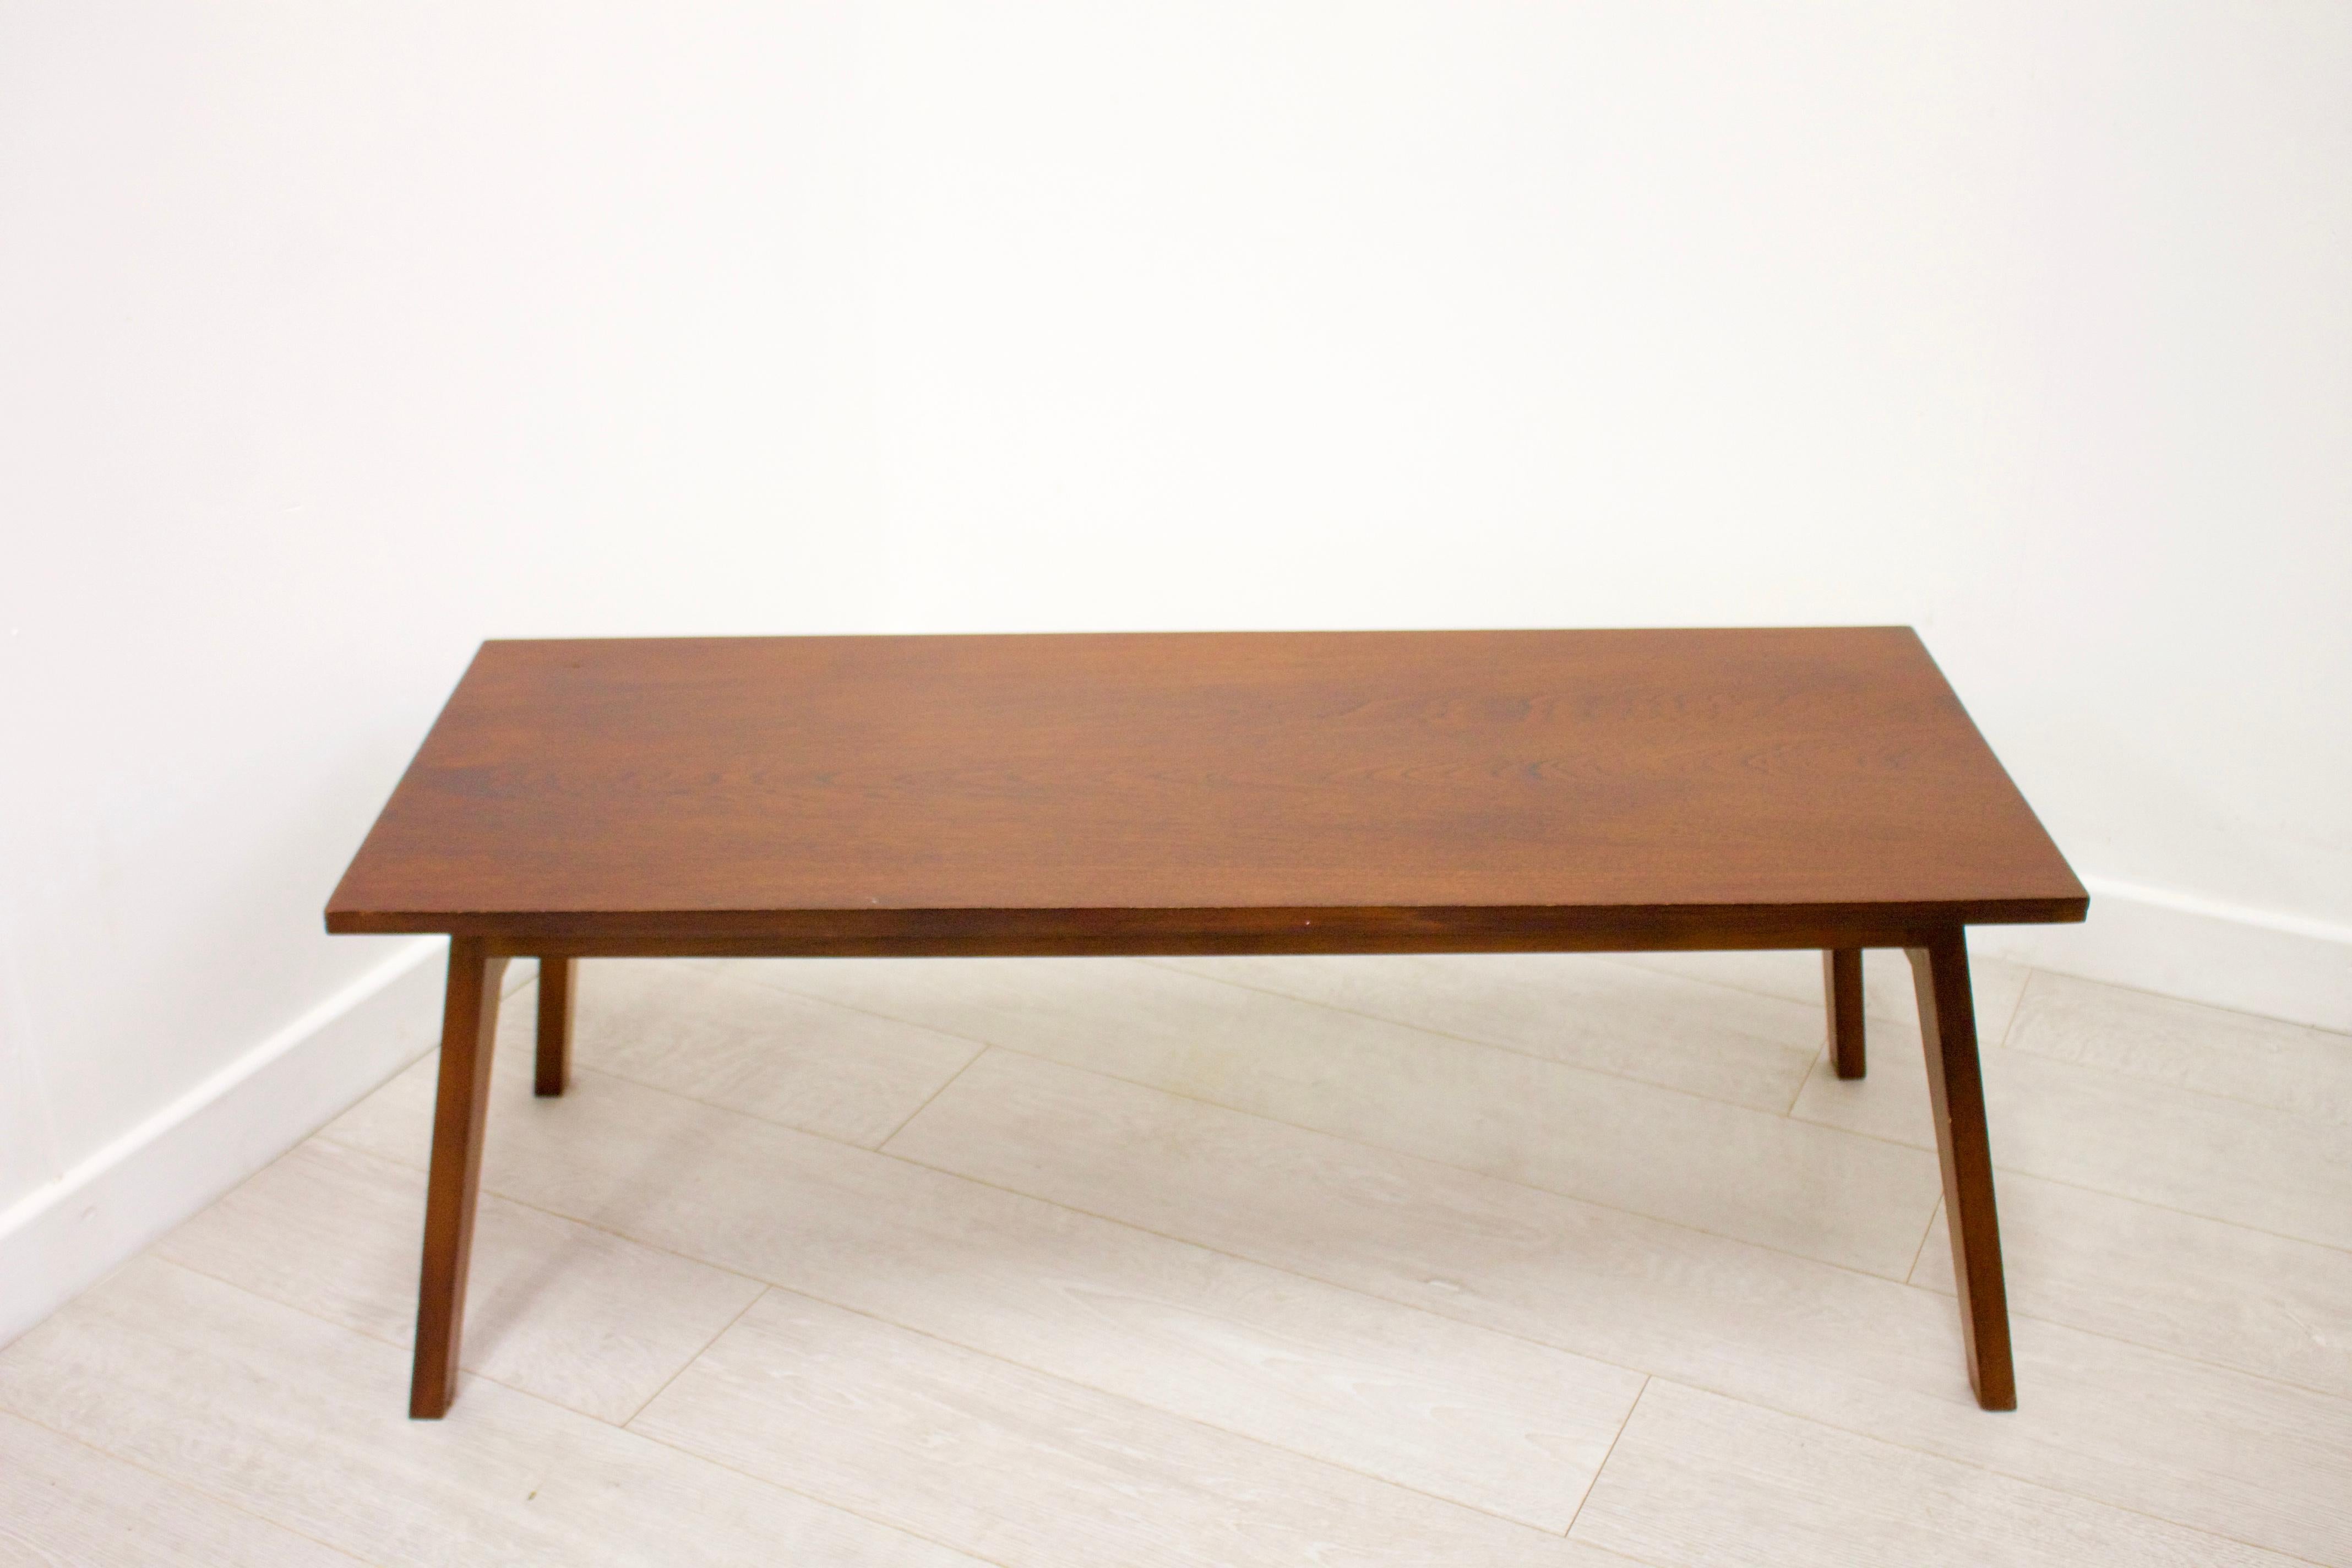 - Midcentury coffee table
- Made from teak.